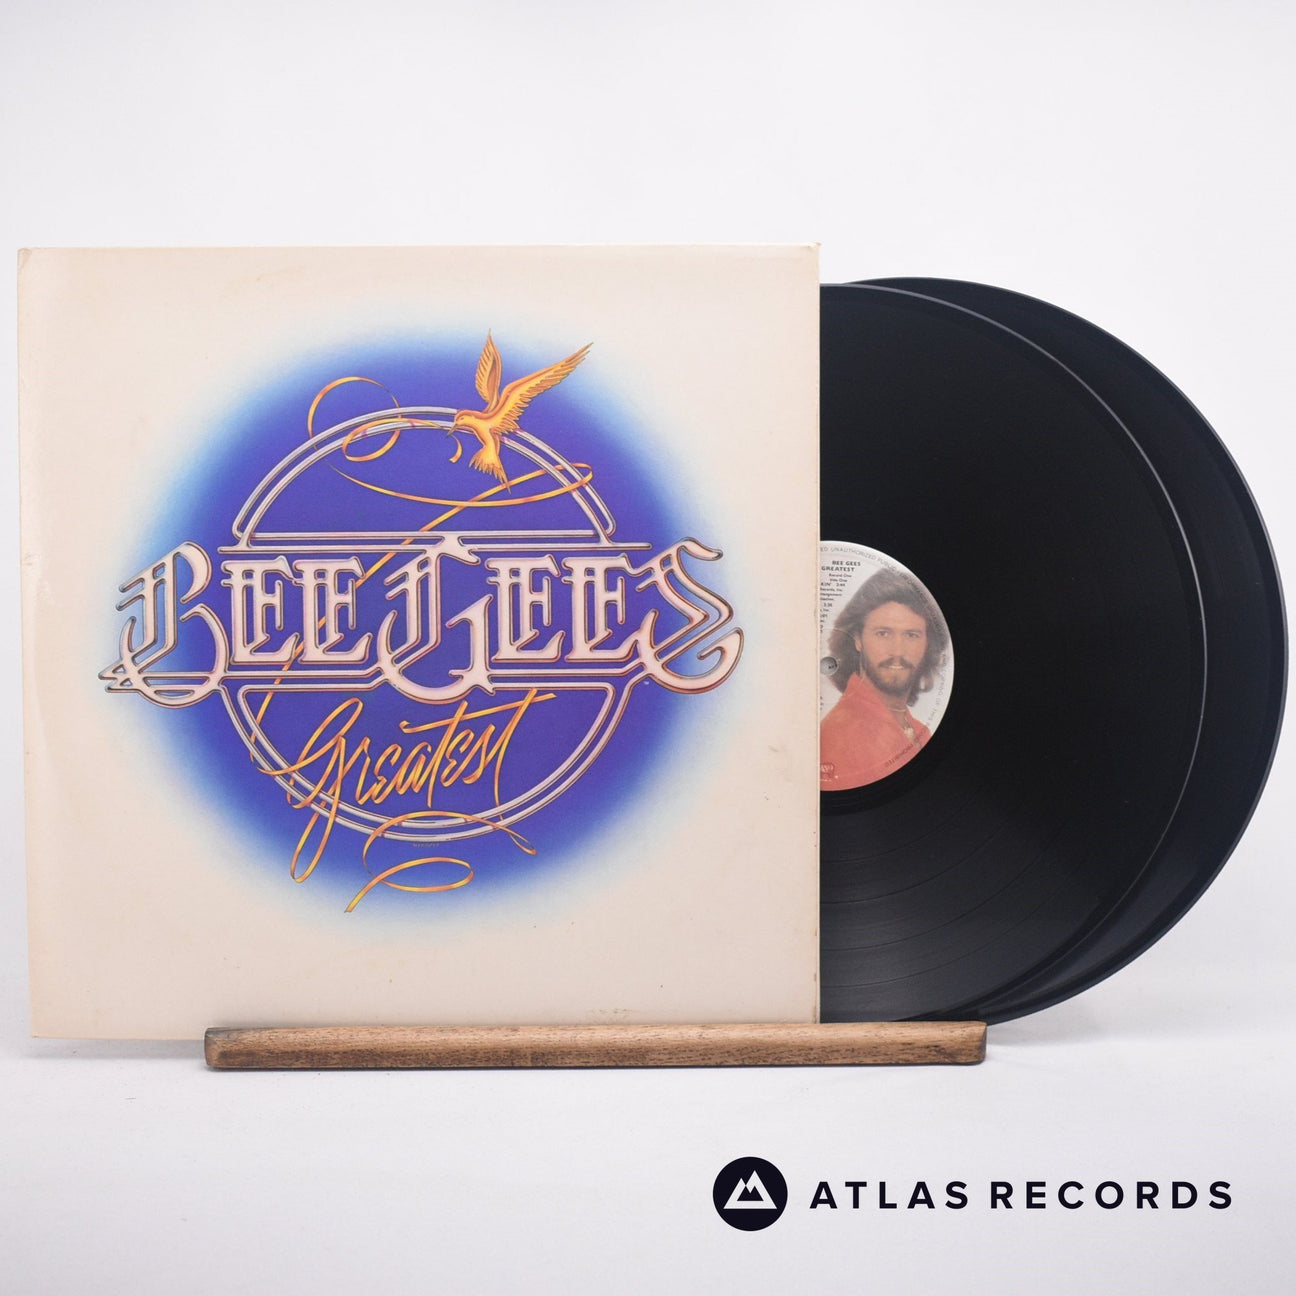 Bee Gees Greatest Double LP Vinyl Record - Front Cover & Record